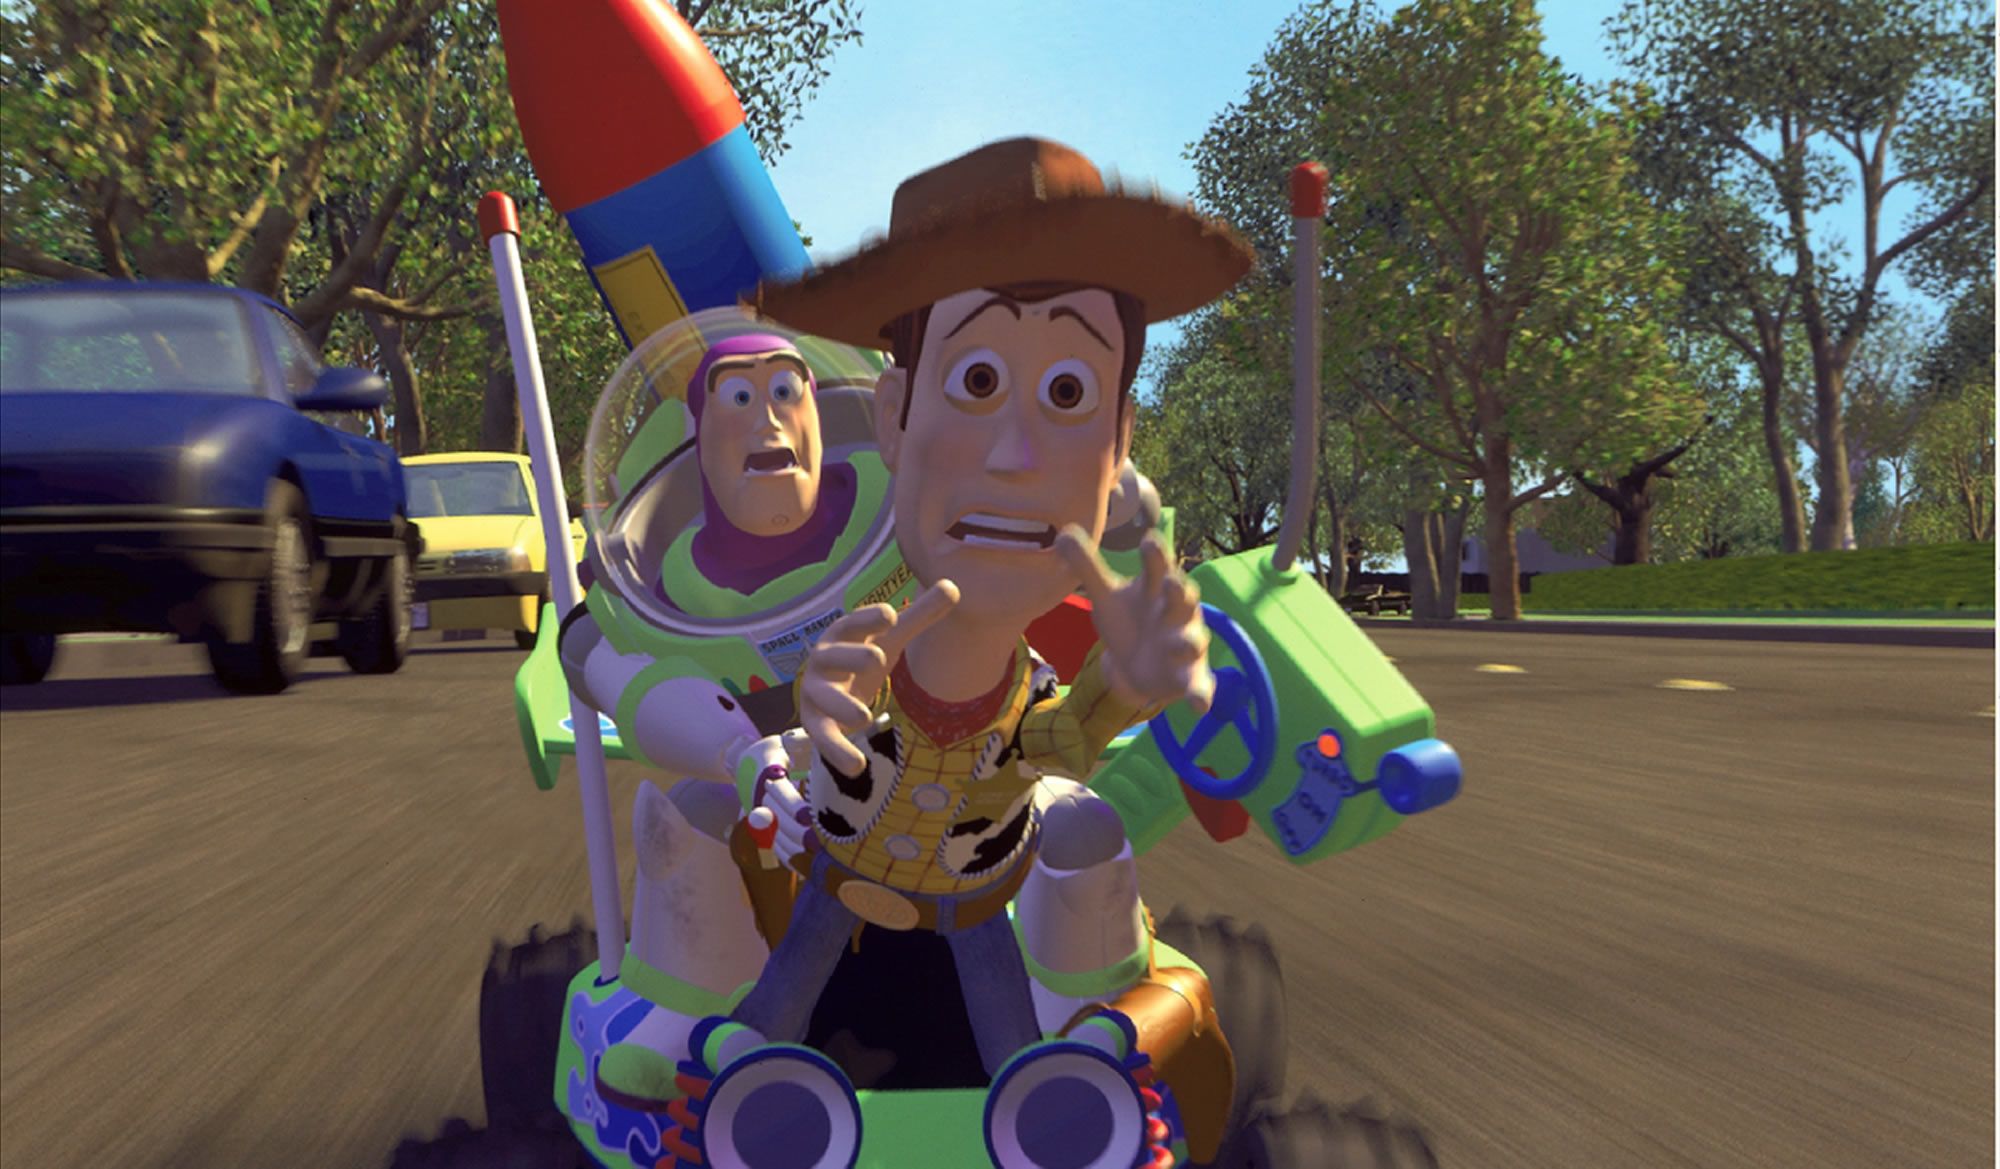 Toy Story & Toy Story 2 double feature